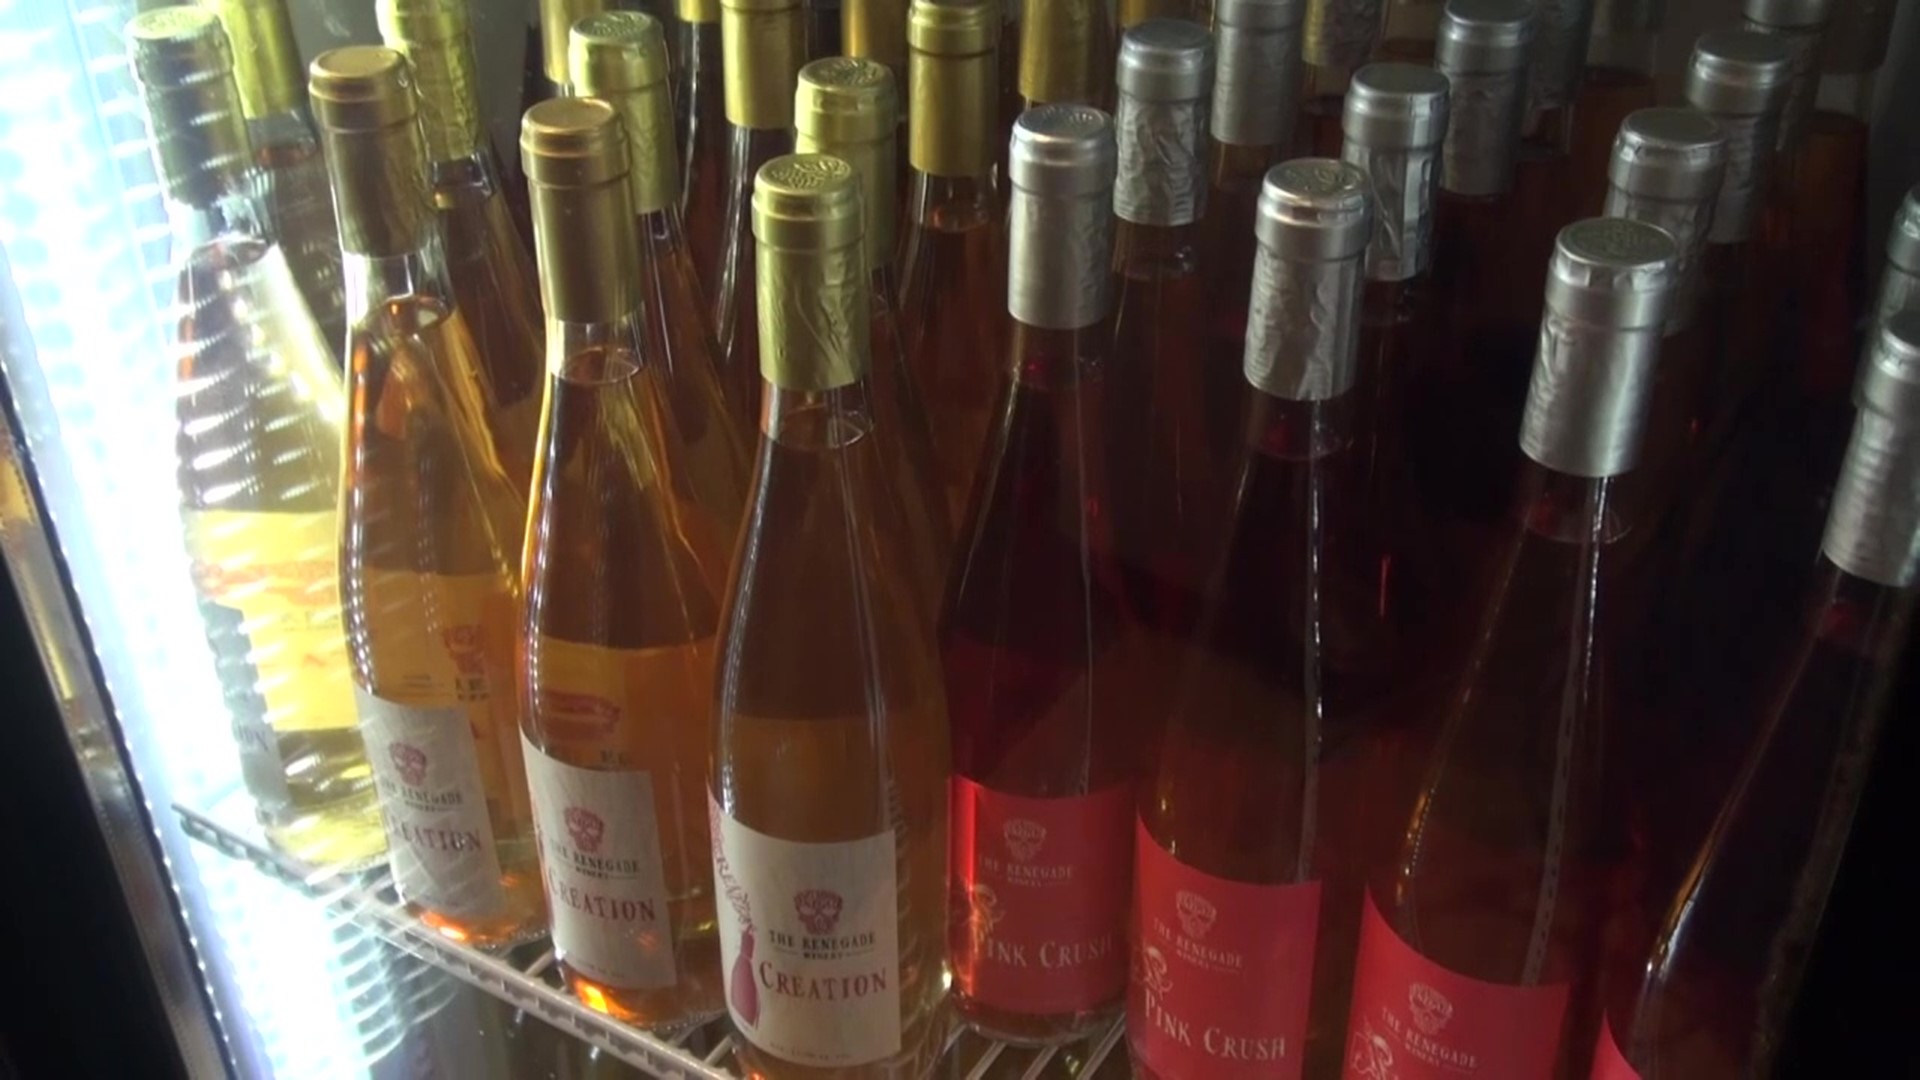 Tis' the season for some homemade wine!
Wineries in Stroudsburg are cashing in this holiday season.